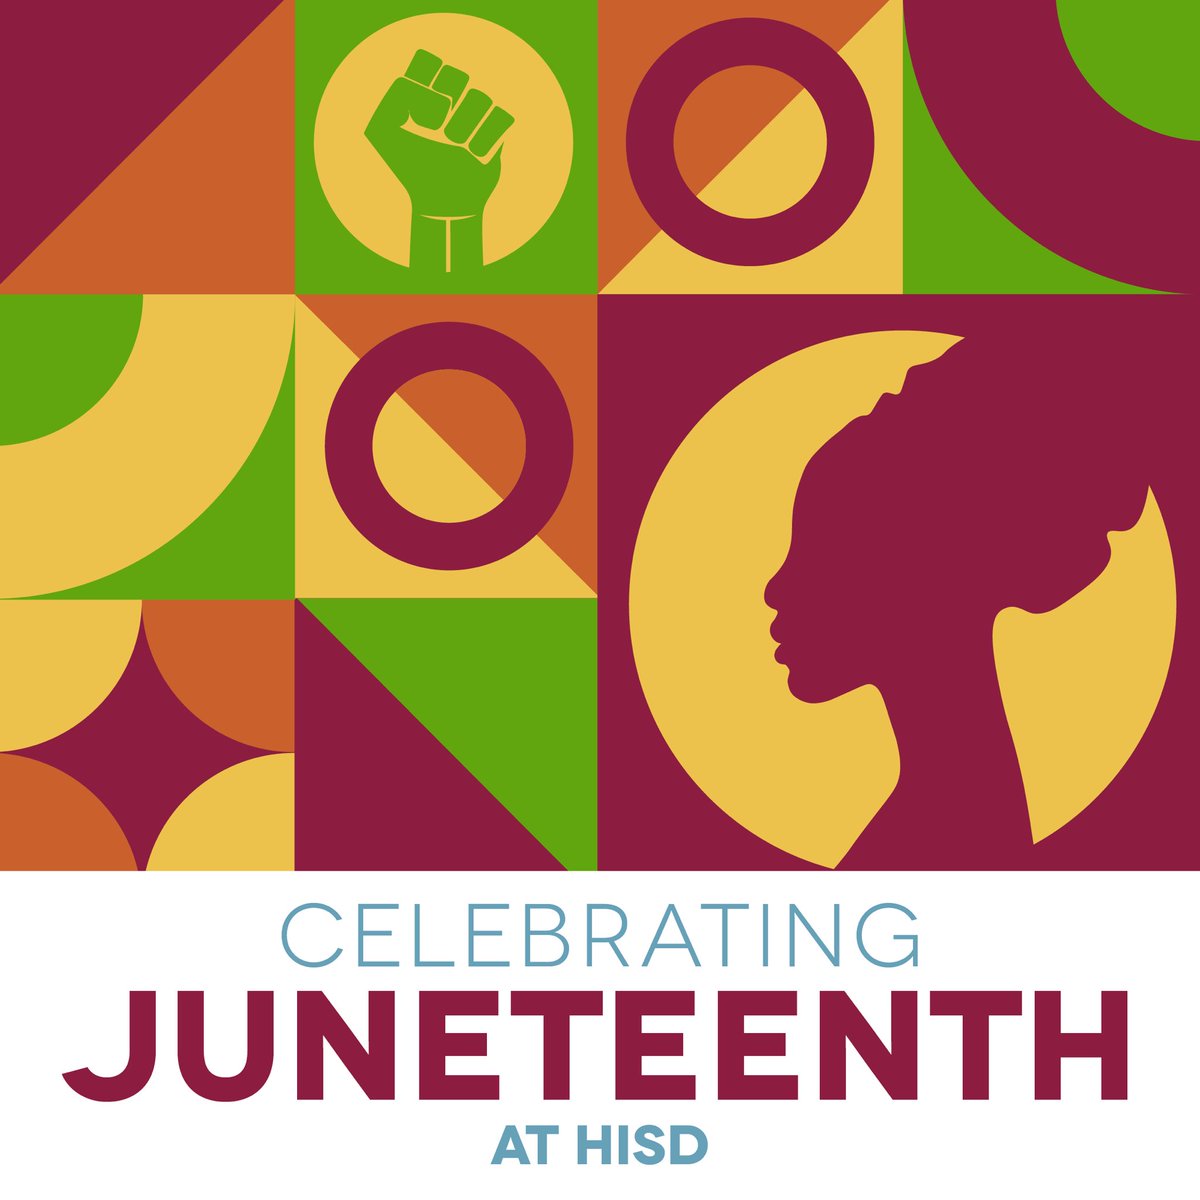 Today we celebrate Juneteenth, a day that commemorates the end of slavery in the United States & honors the resilience & perseverance of African Americans throughout history. We encourage you to enjoy all the Juneteenth festivities with your family, friends, & community today.